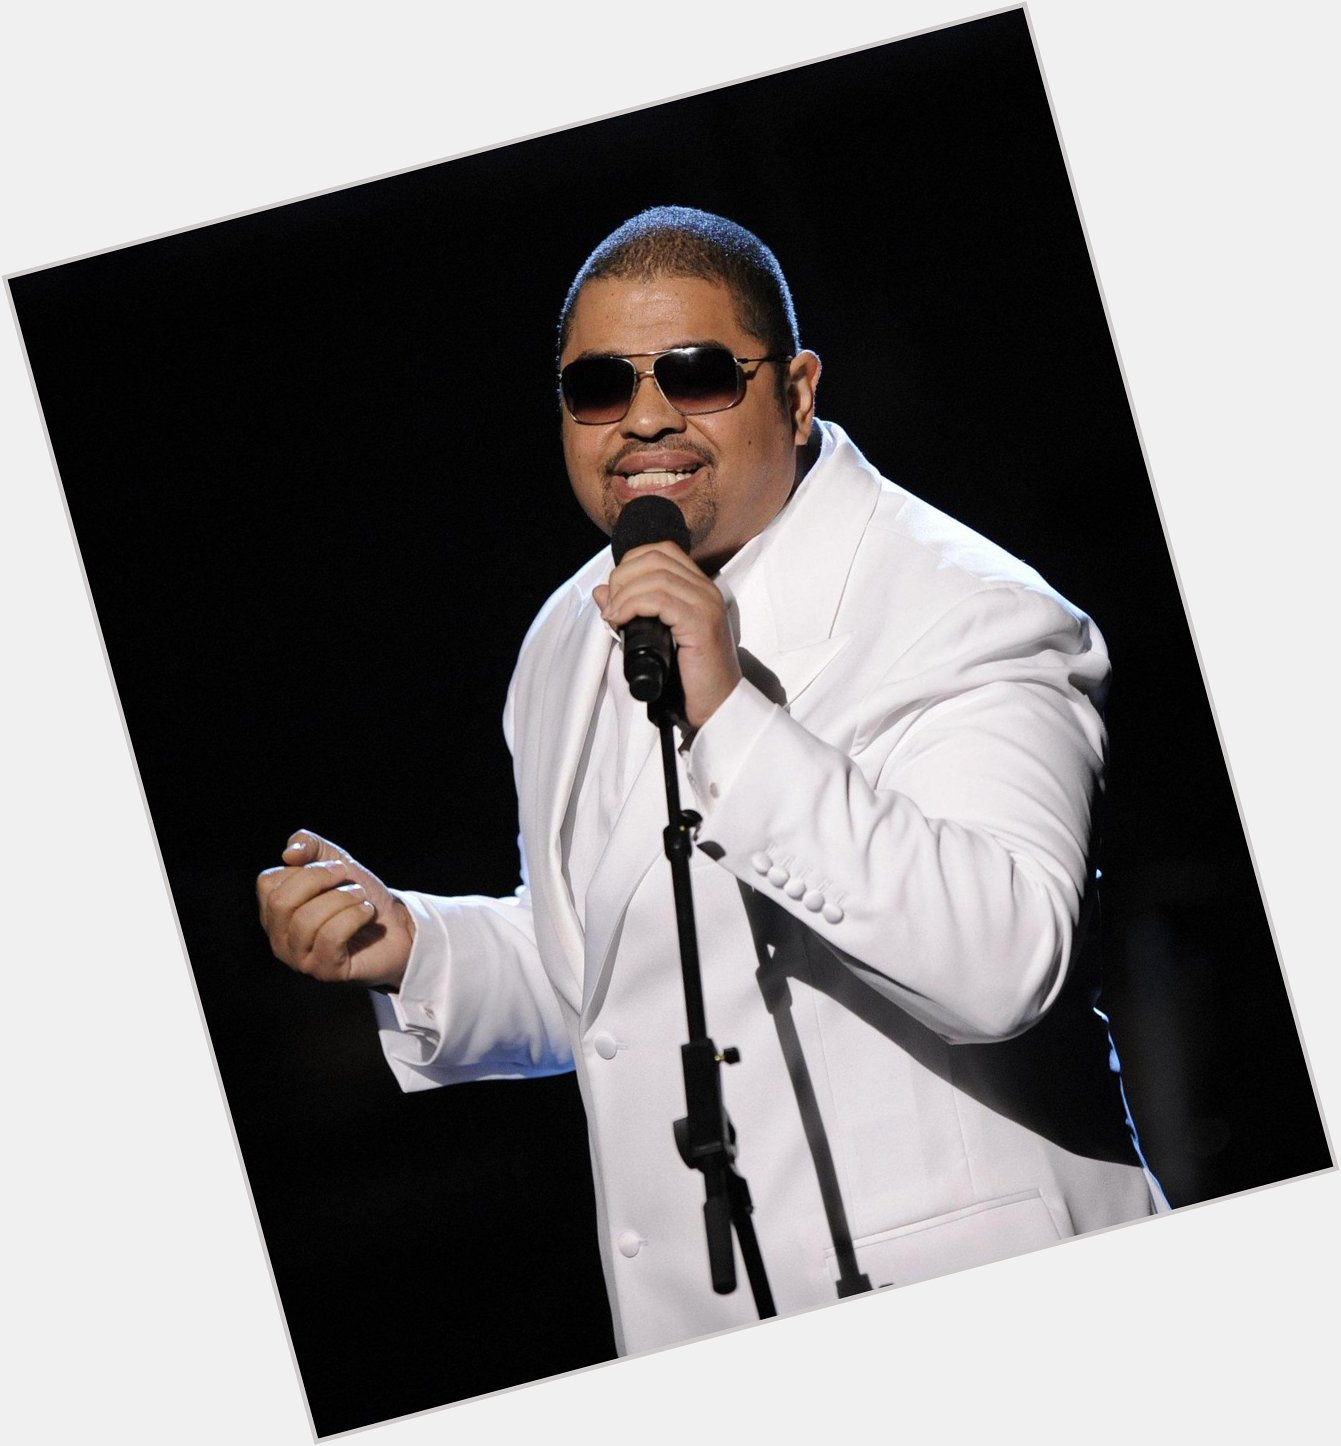 Happy Birthday Heavy D.  He would have been 48 today.  gone way too soon. 